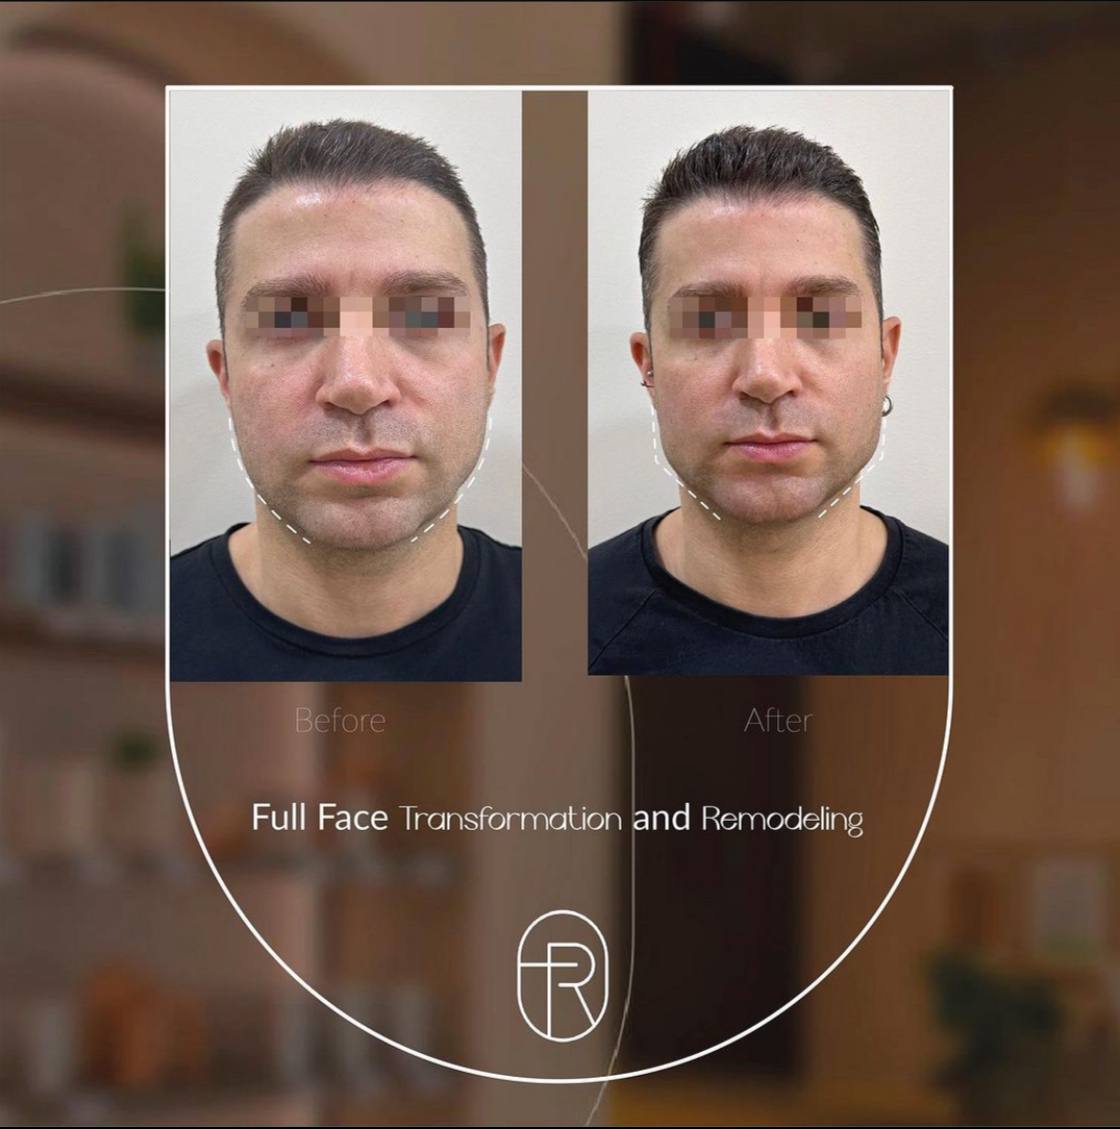 Before After - Full Face Transformation